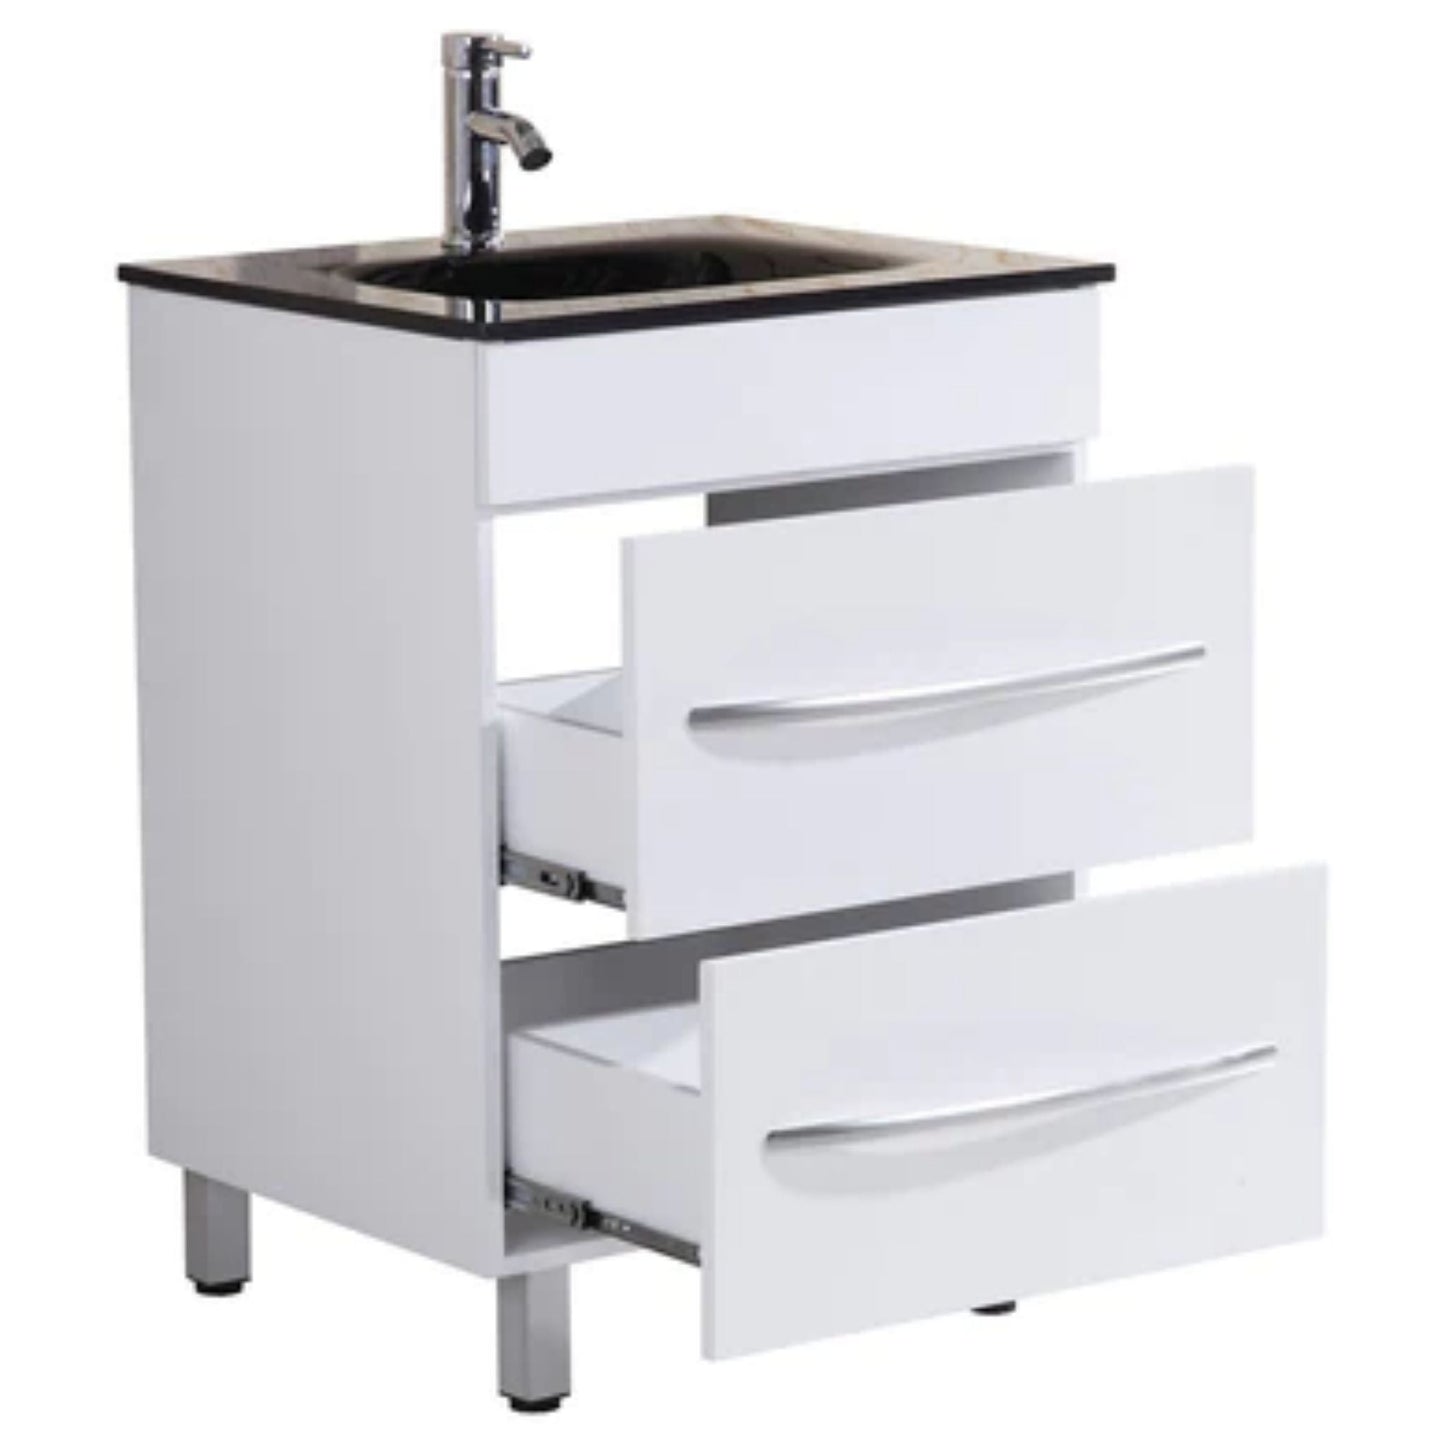 LessCare 24" White Vanity Sink Base Cabinet with Mirror - Style 4